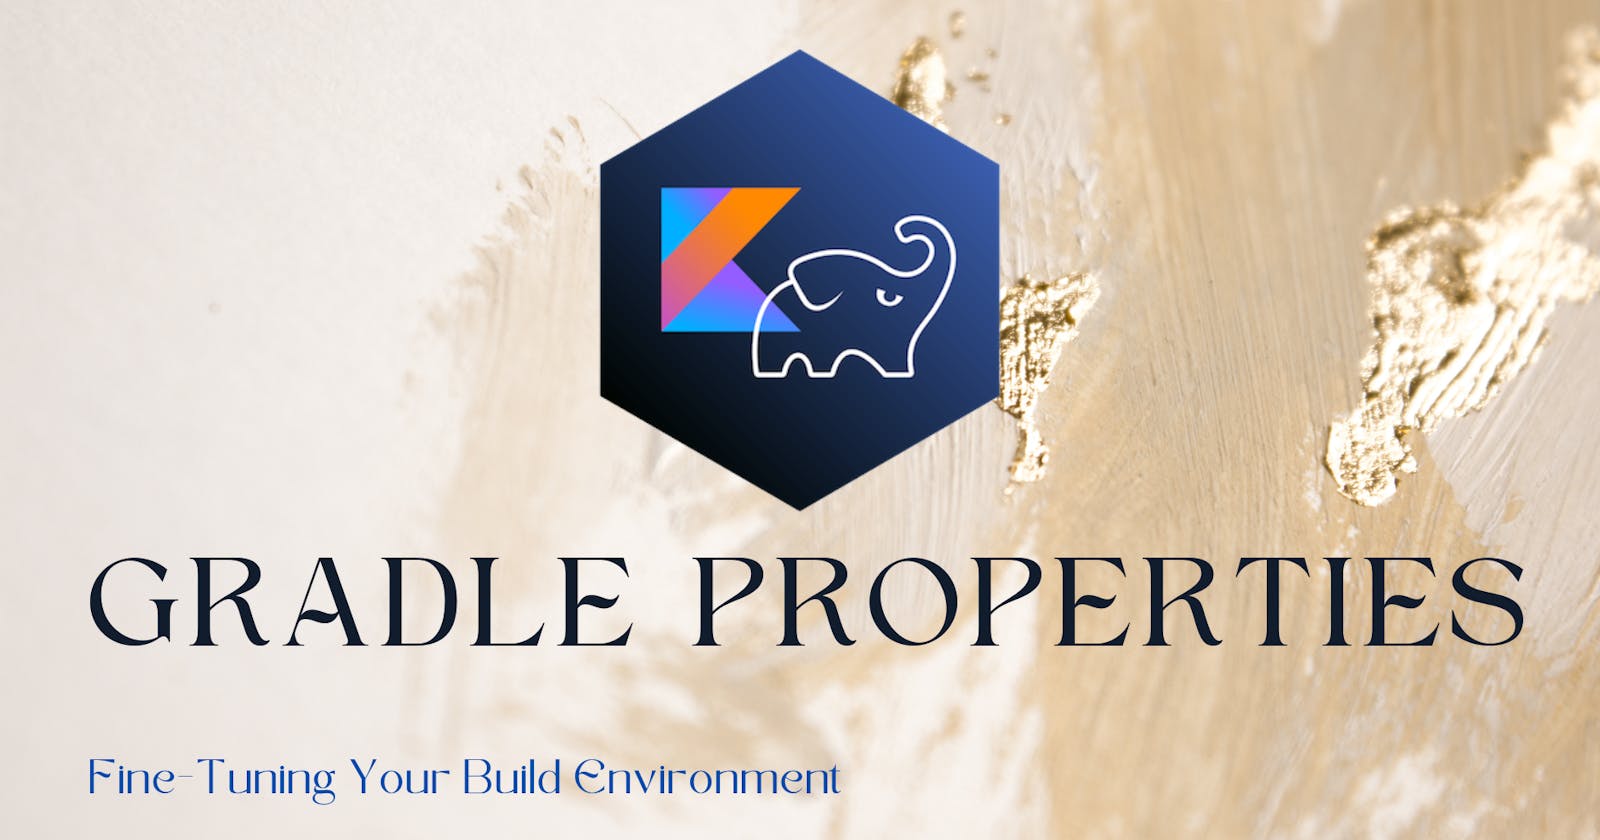 Demystifying Gradle Properties: Fine-Tuning Your Build Environment